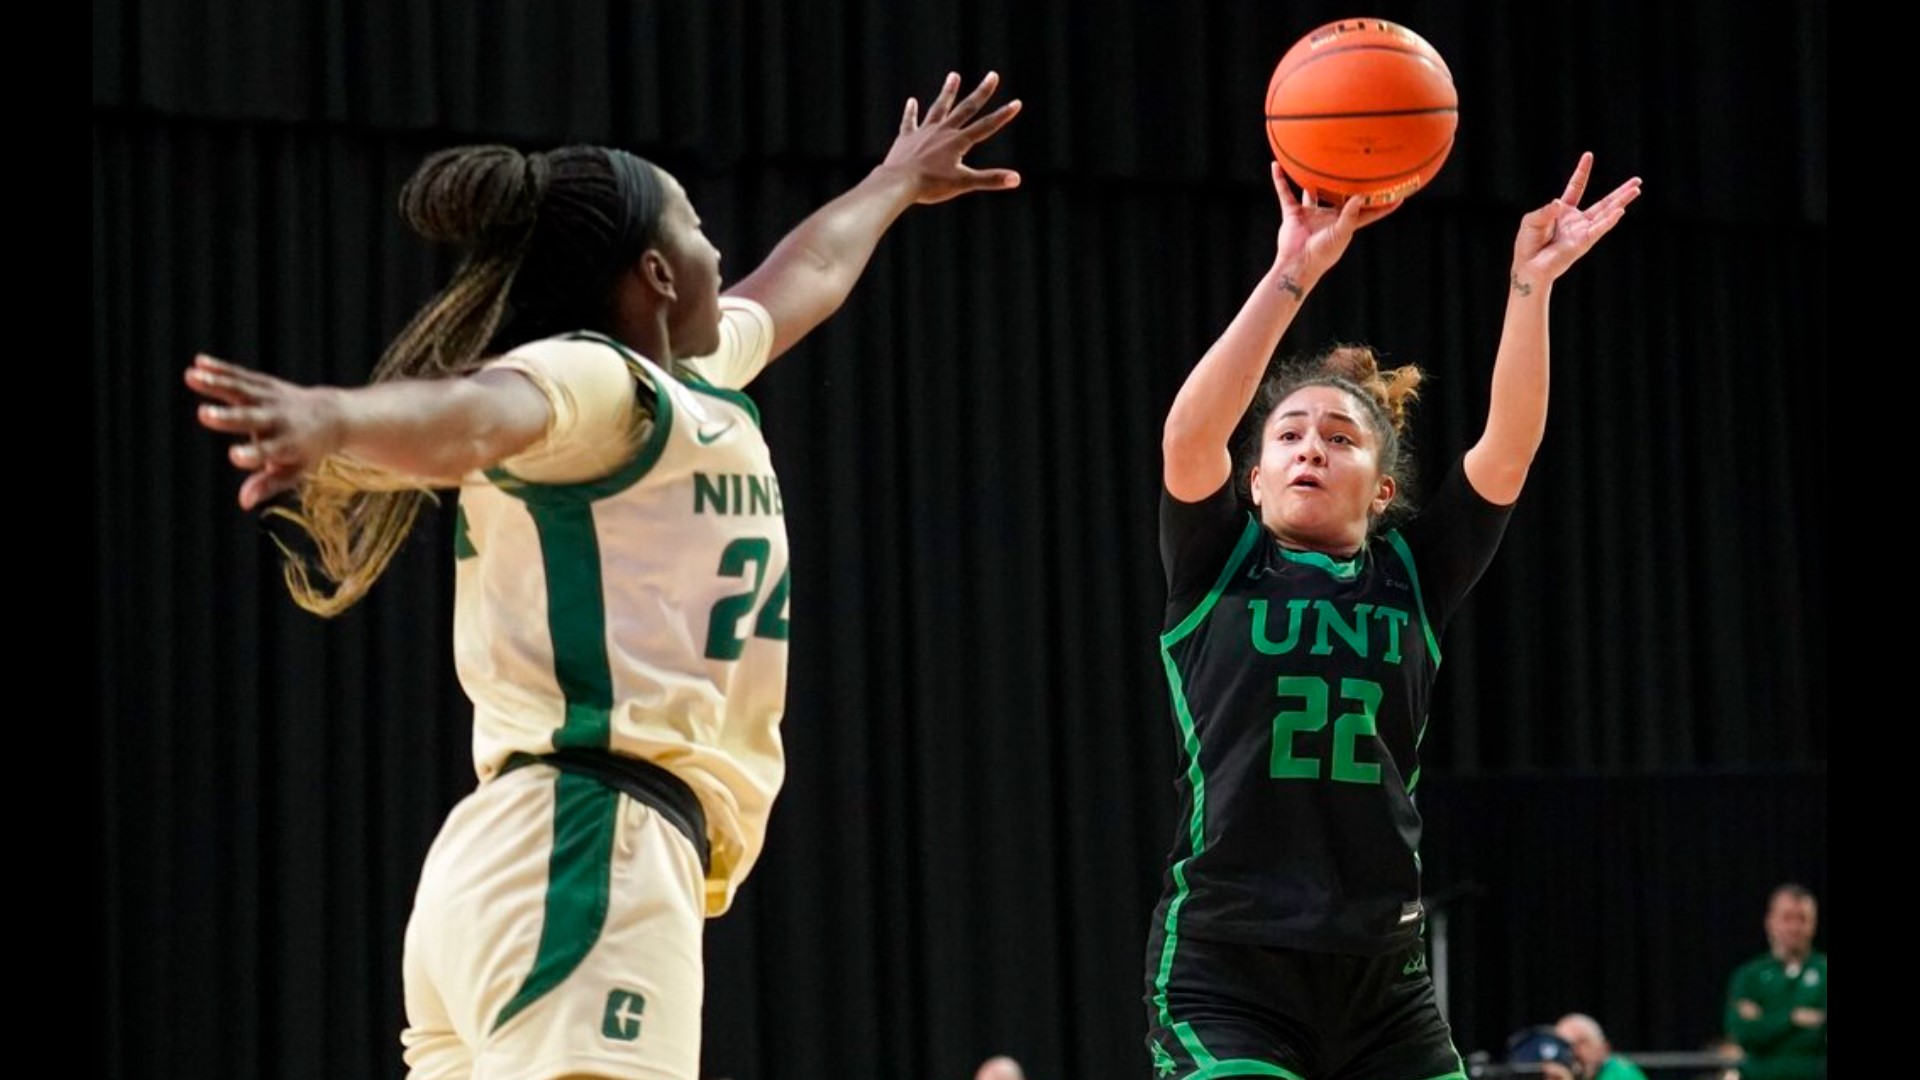 The Charlotte 49ers women's basketball team is headed to the NCAA Tournament for the third time in program history, and for the first time since 2009.